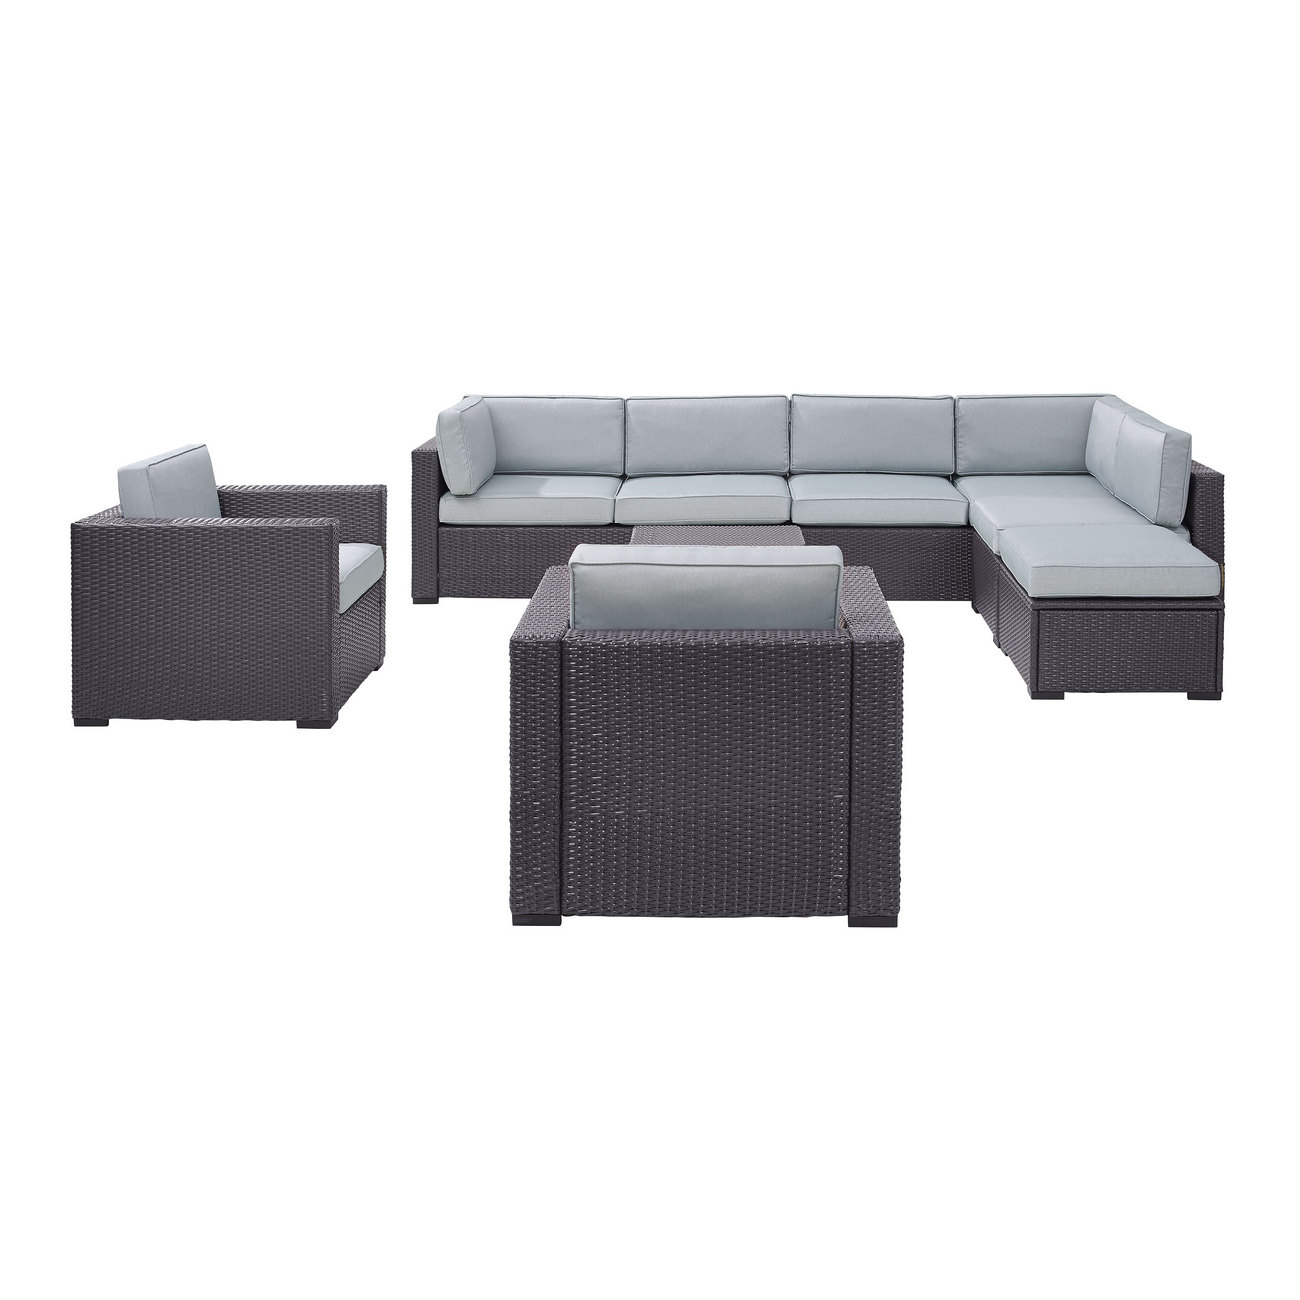 Outdoor Sectional Set Chair Coffee Table Ottoman Loveseats